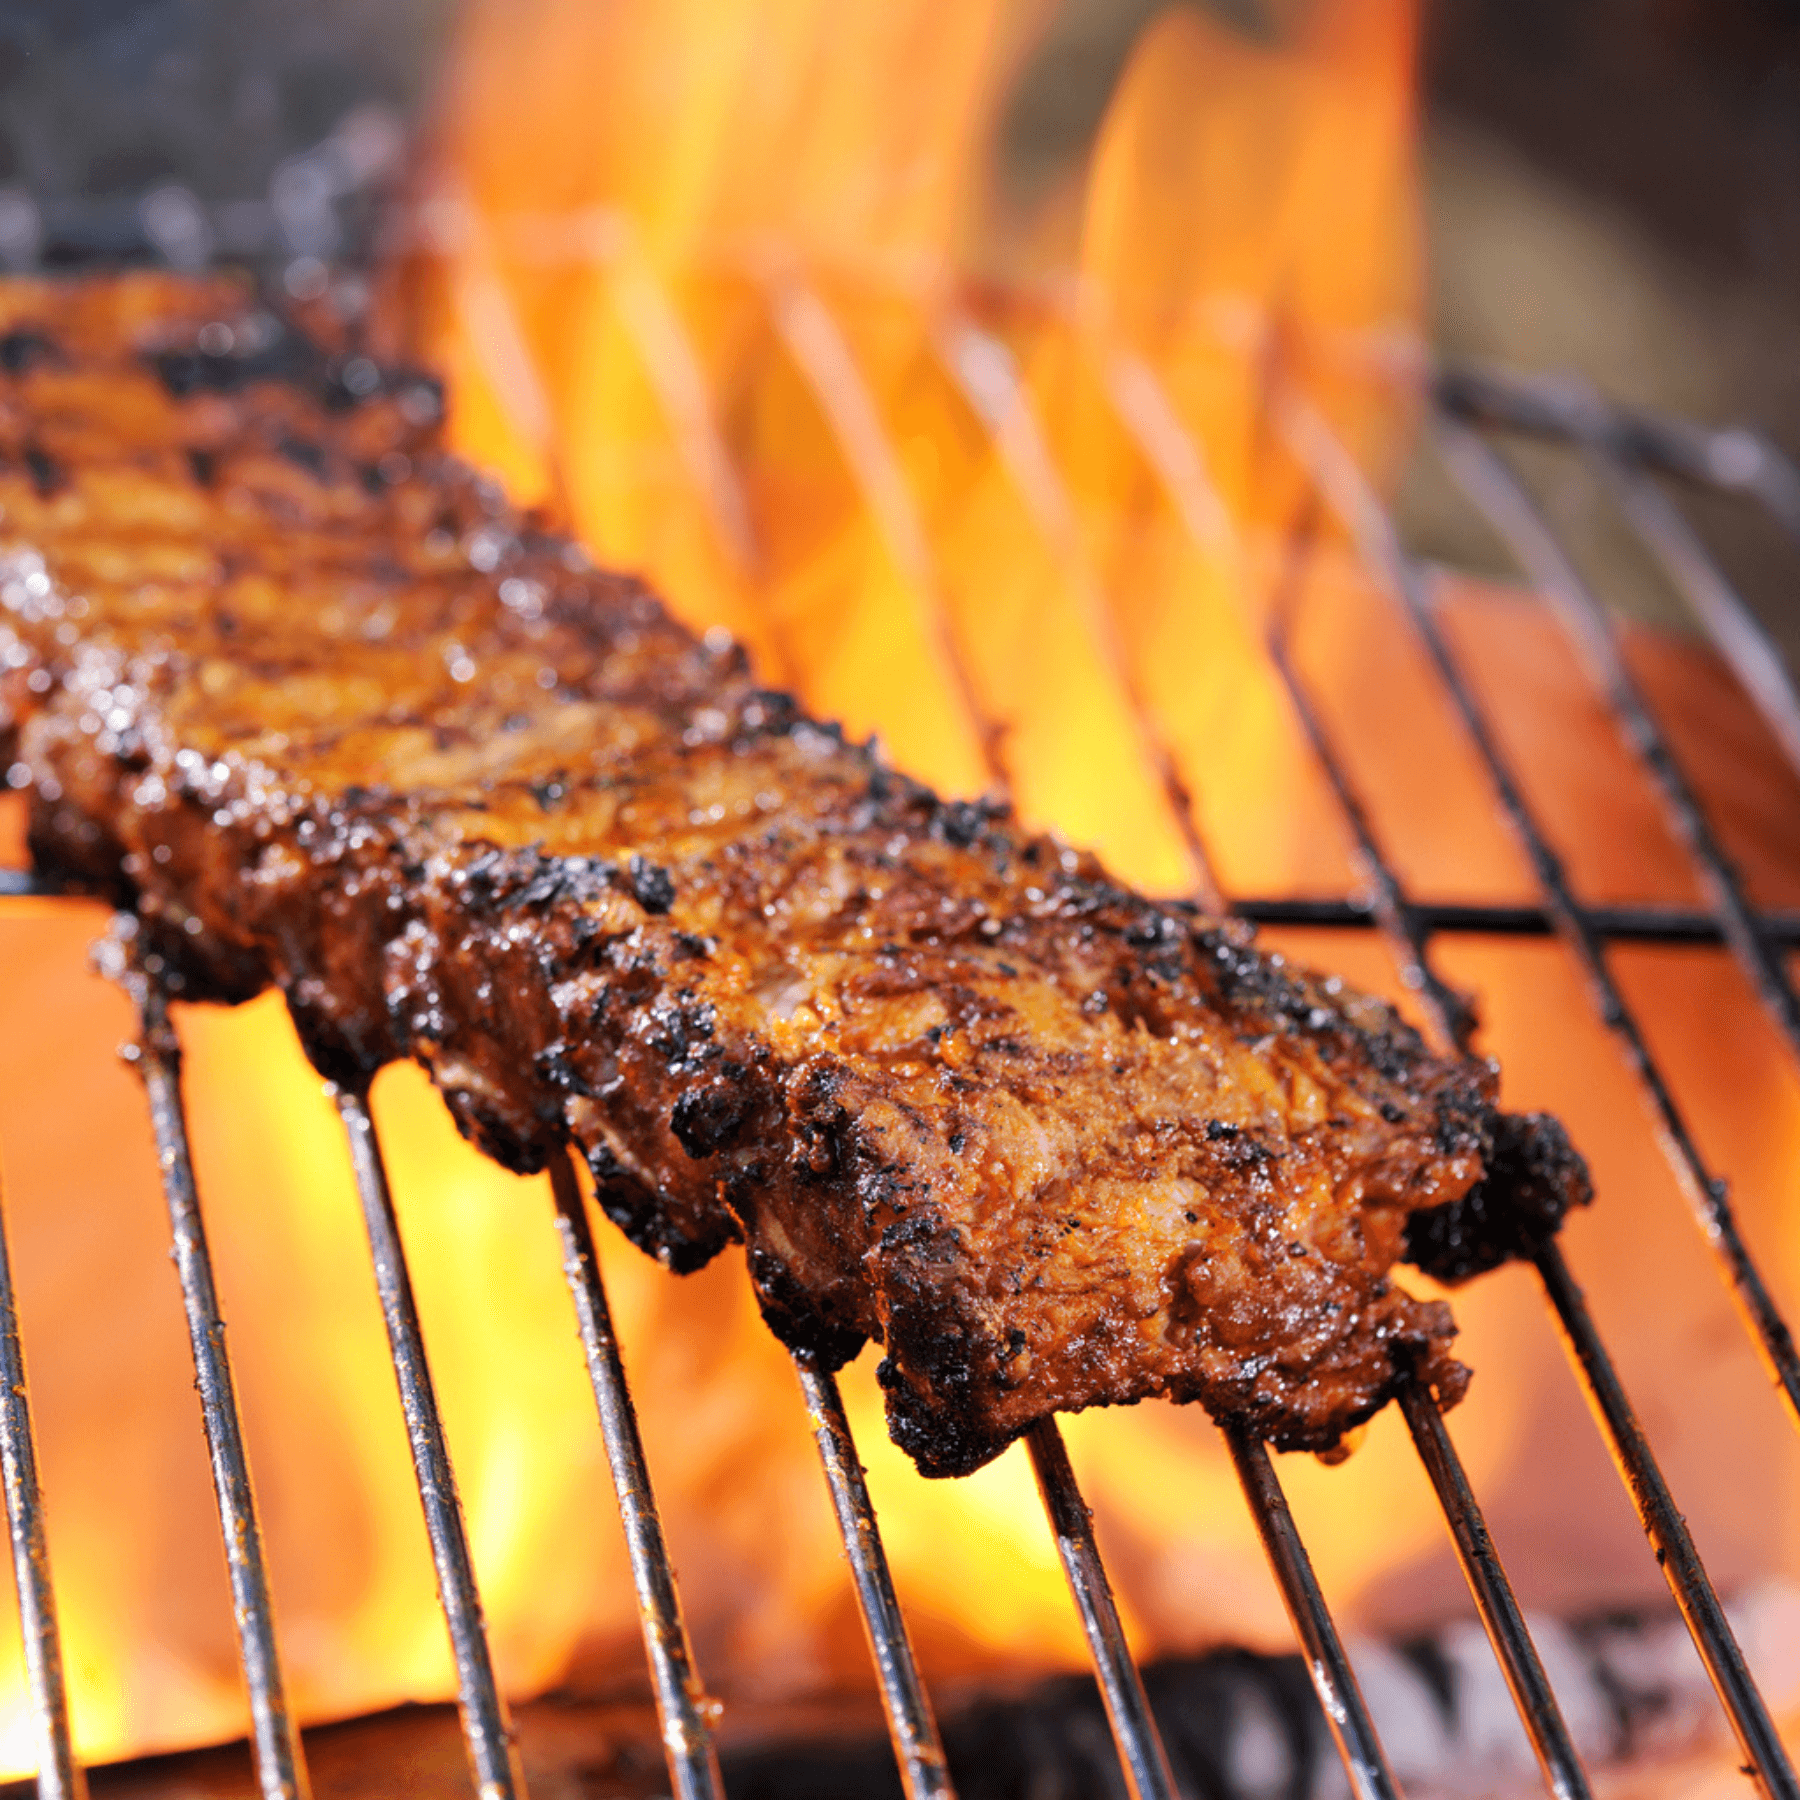 Steaks and Ribs